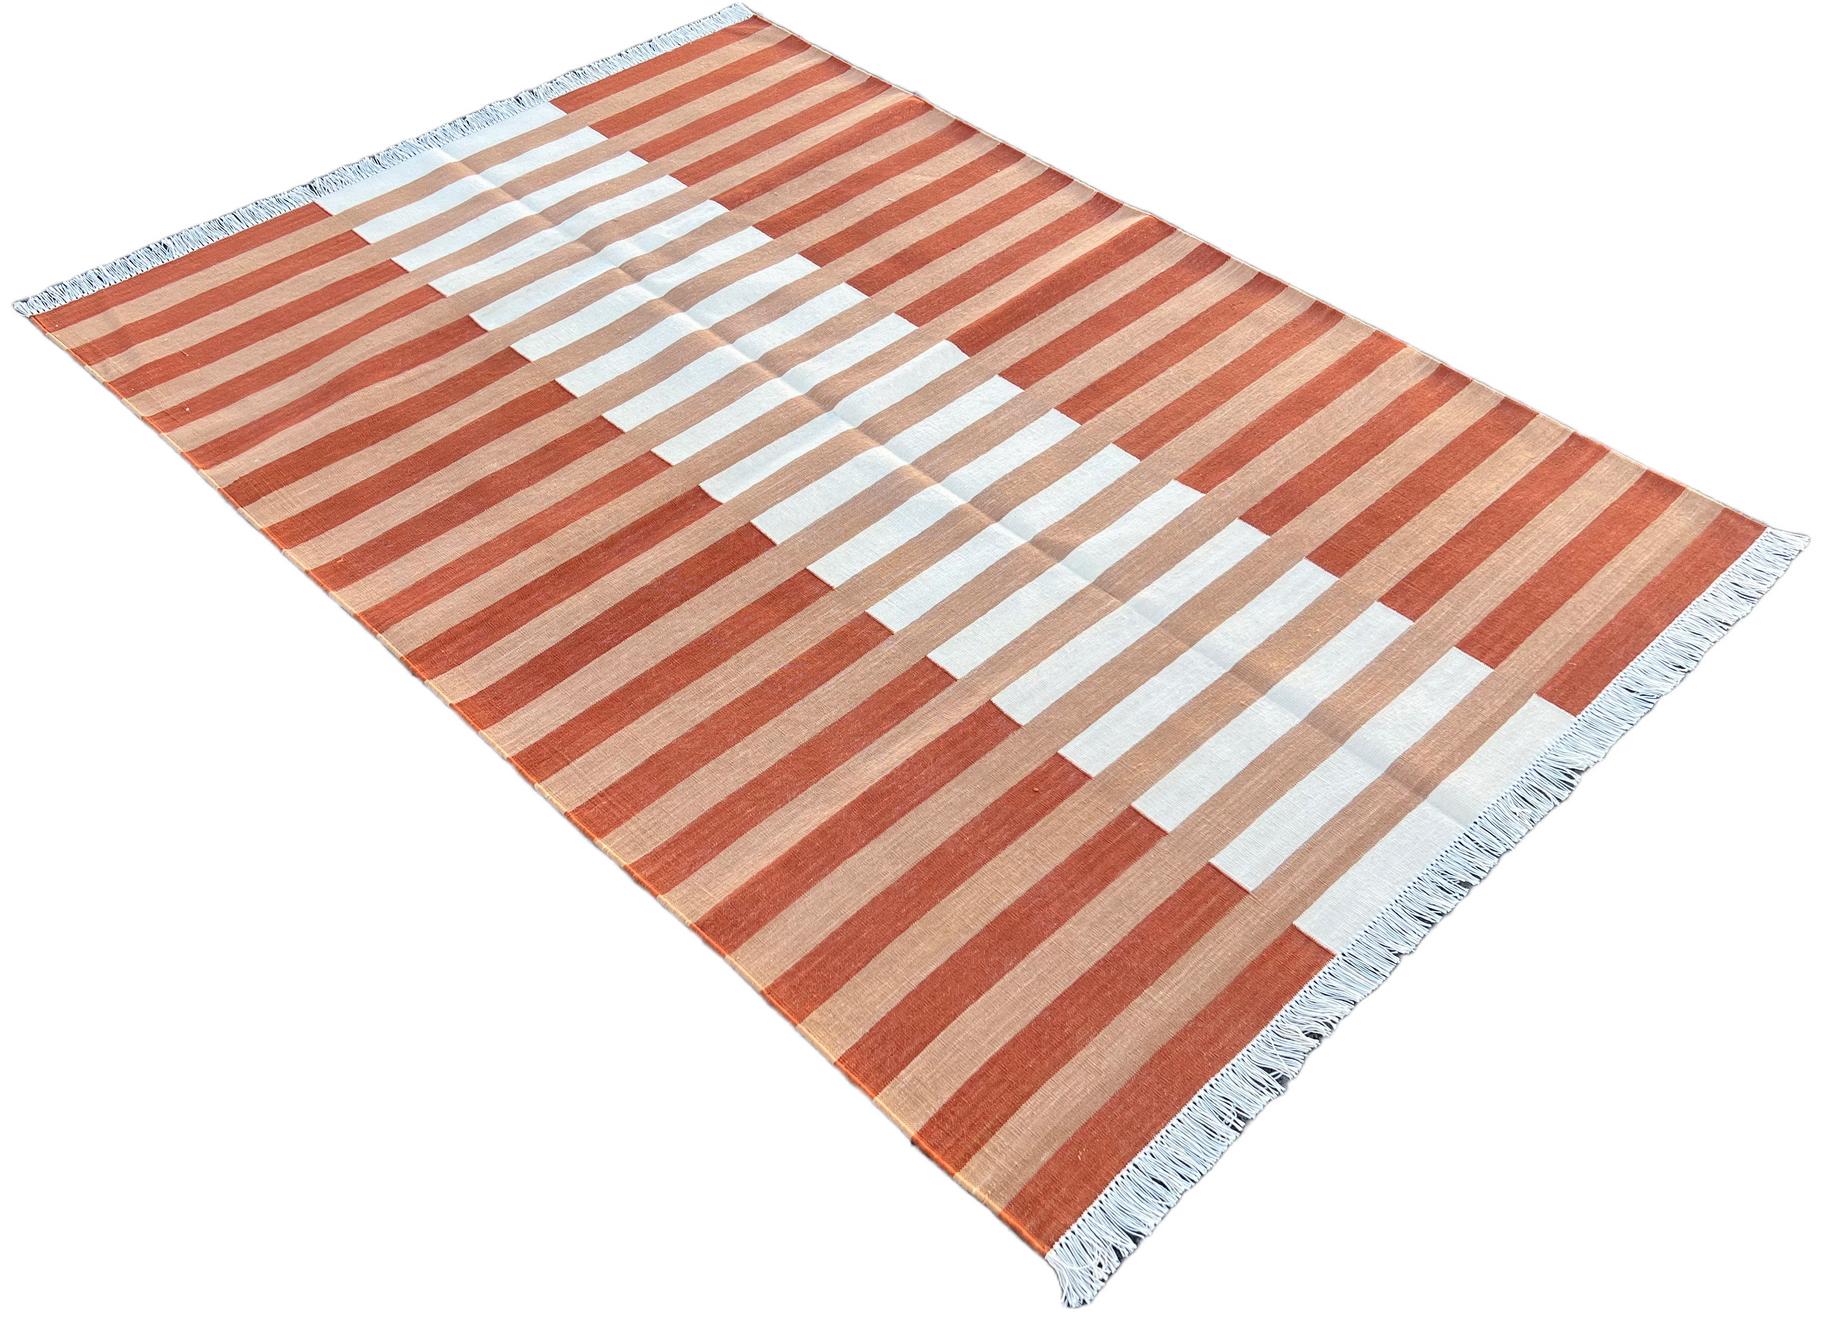 Cotton Vegetable Dyed Tan, Cream And Beige Striped Indian Dhurrie Rug-4'x6' 
These special flat-weave dhurries are hand-woven with 15 ply 100% cotton yarn. Due to the special manufacturing techniques used to create our rugs, the size and color of